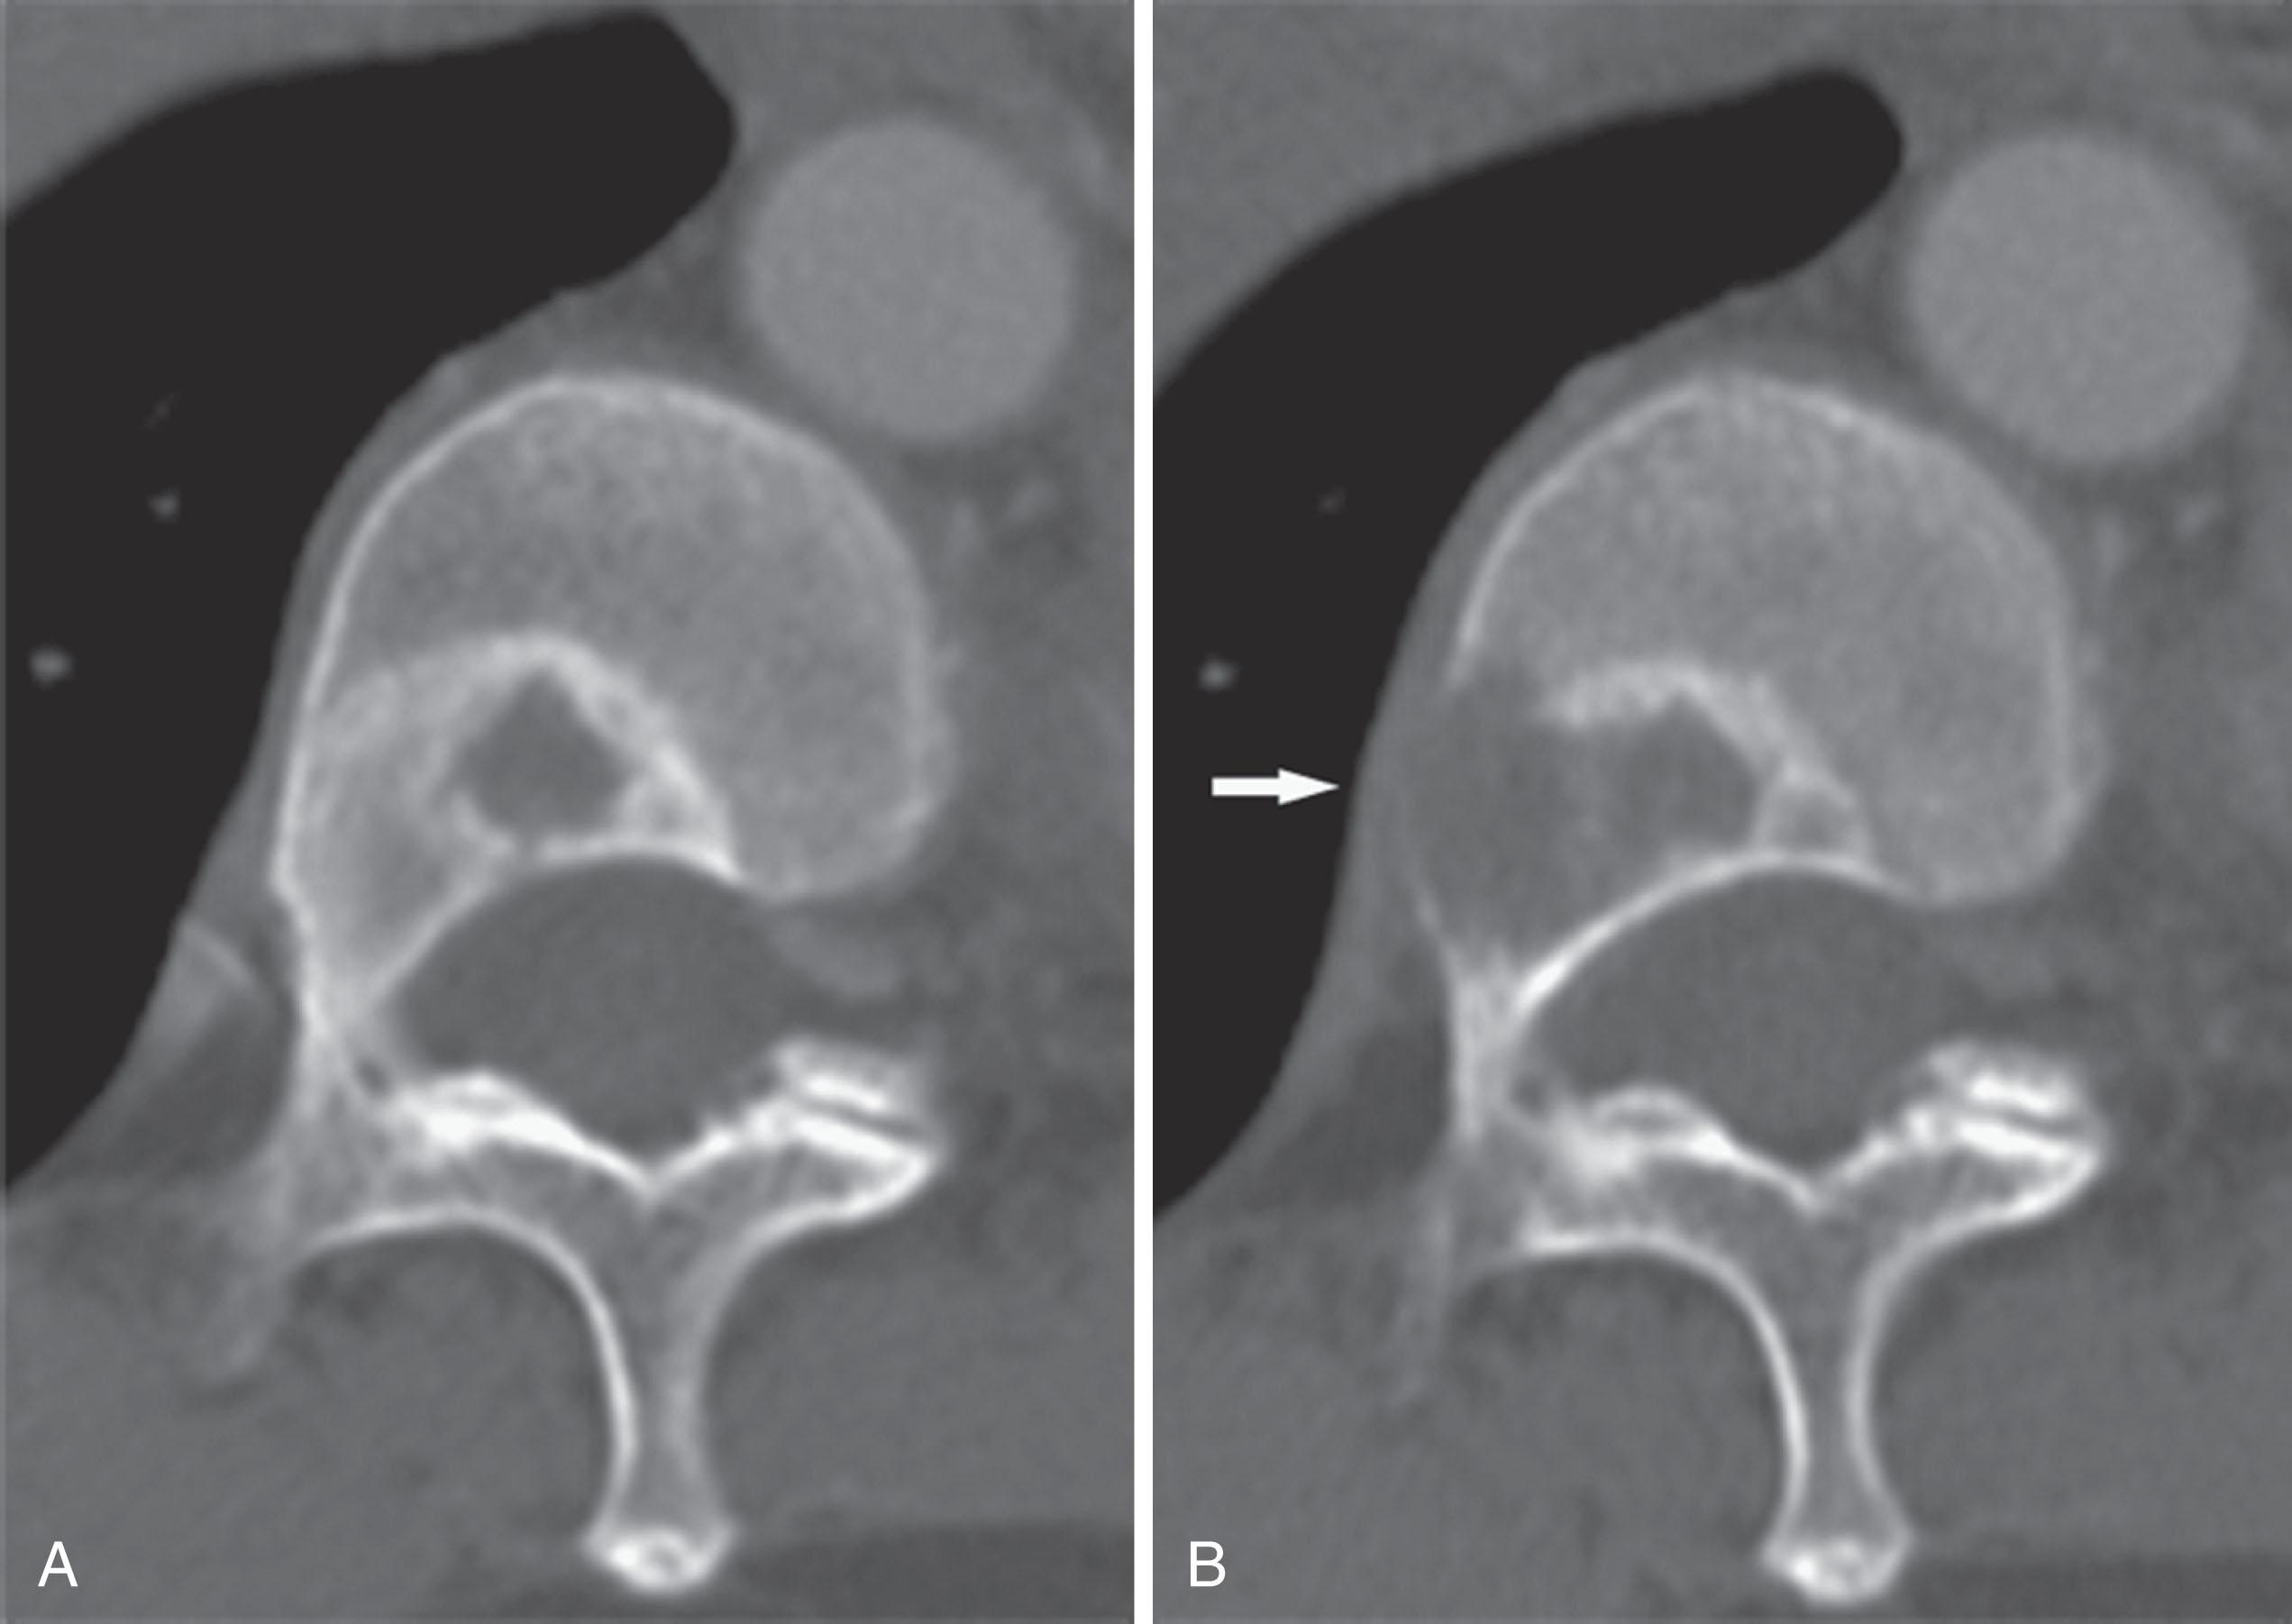 Figure 34.2, Appearance of bone metastases. A , Computed tomography of a well-defined mixed lytic/blastic bone metastases from non–small-cell lung cancer. B , Eight months later, lytic disease has progressed. The new area of osteolysis is ill-defined and expansile and demonstrates a permeative margin that destroys the cortex of the vertebral body ( arrow ).